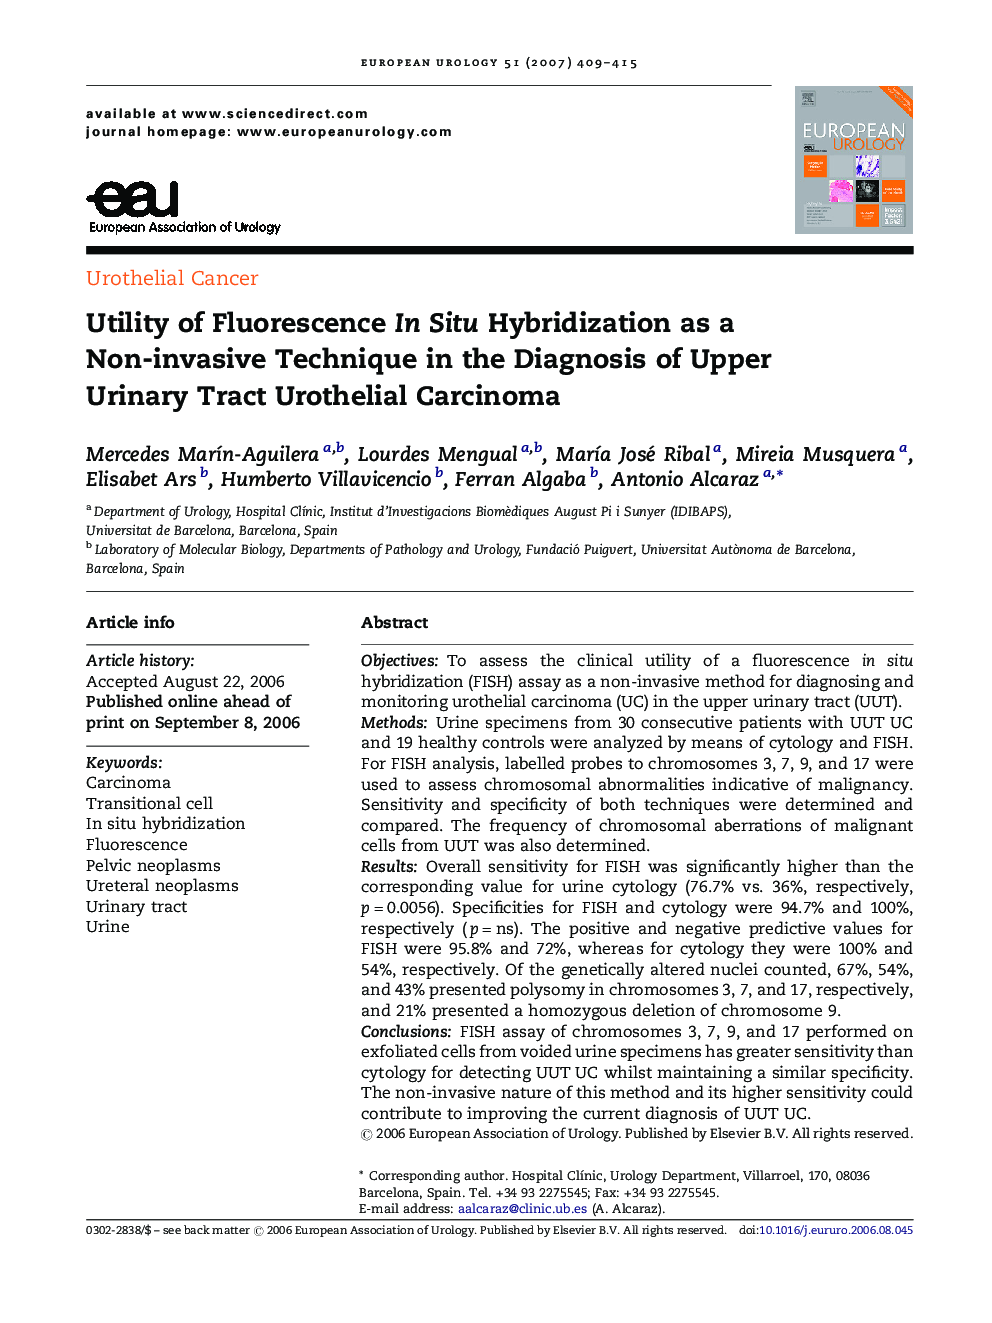 Utility of Fluorescence In Situ Hybridization as a Non-invasive Technique in the Diagnosis of Upper Urinary Tract Urothelial Carcinoma